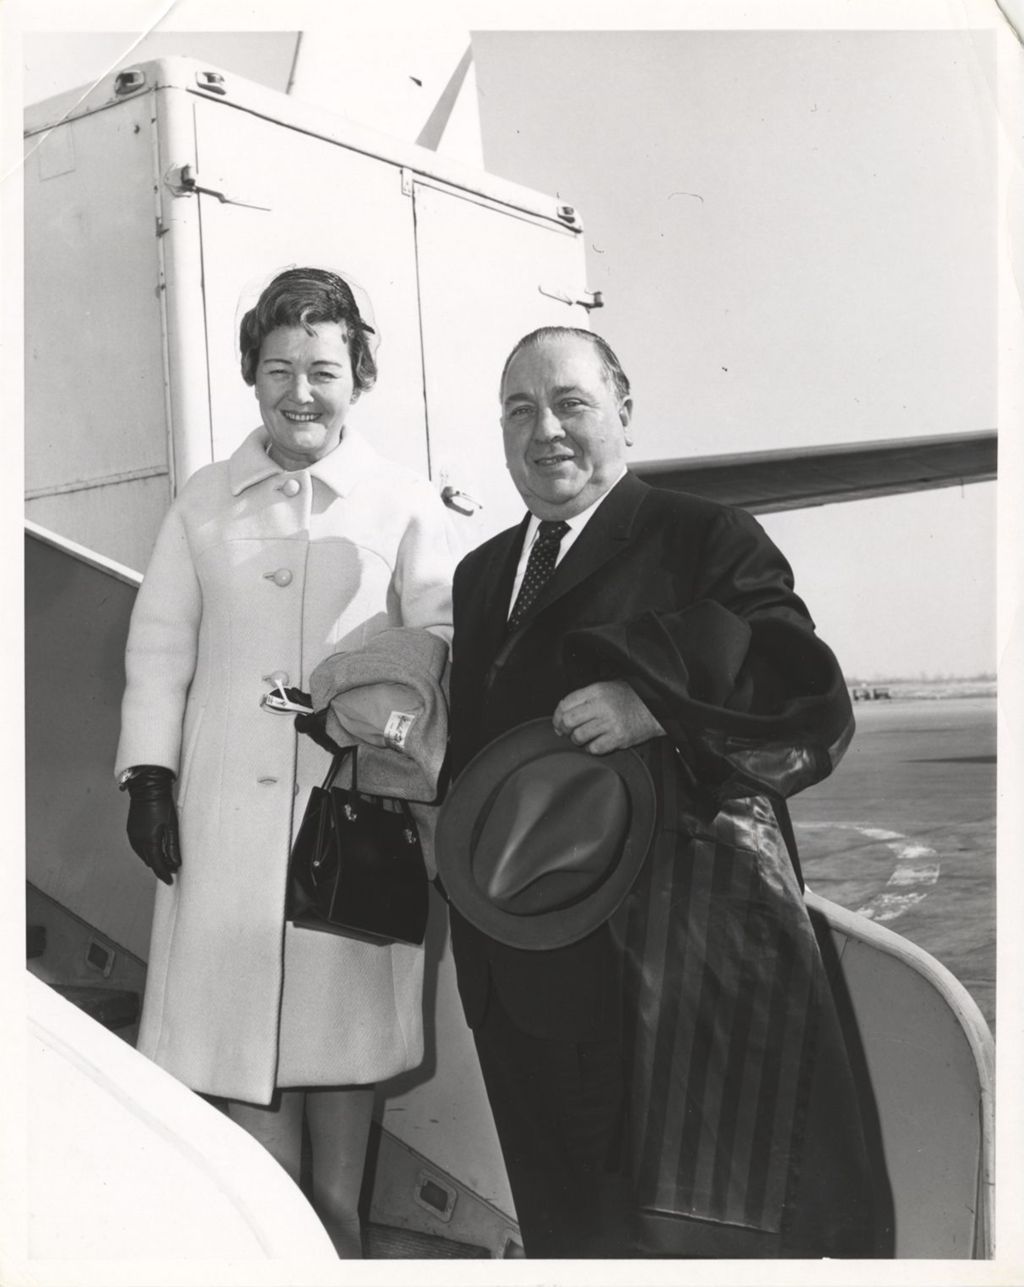 Eleanor and Richard J. Daley board a plane for Europe